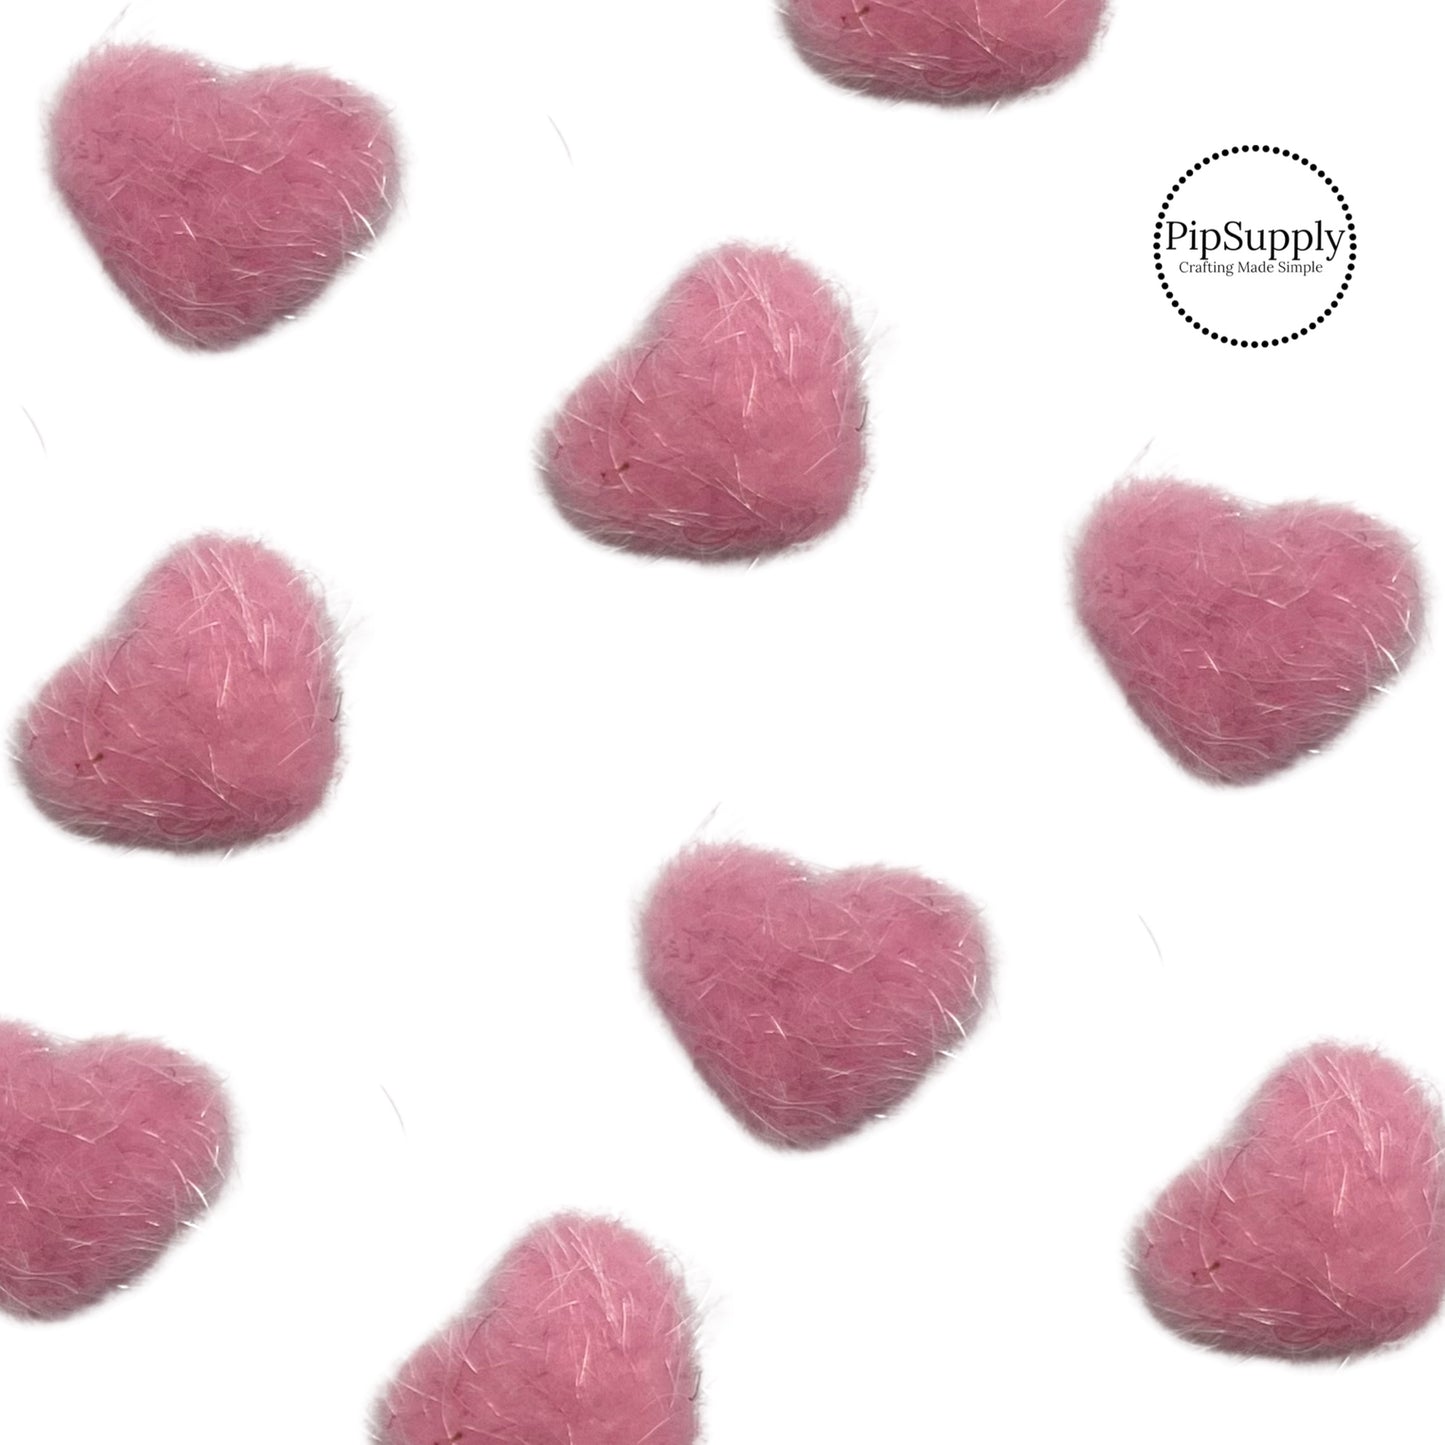 17mm small pink fuzzy heart embellishment with flat back for bows and crafts